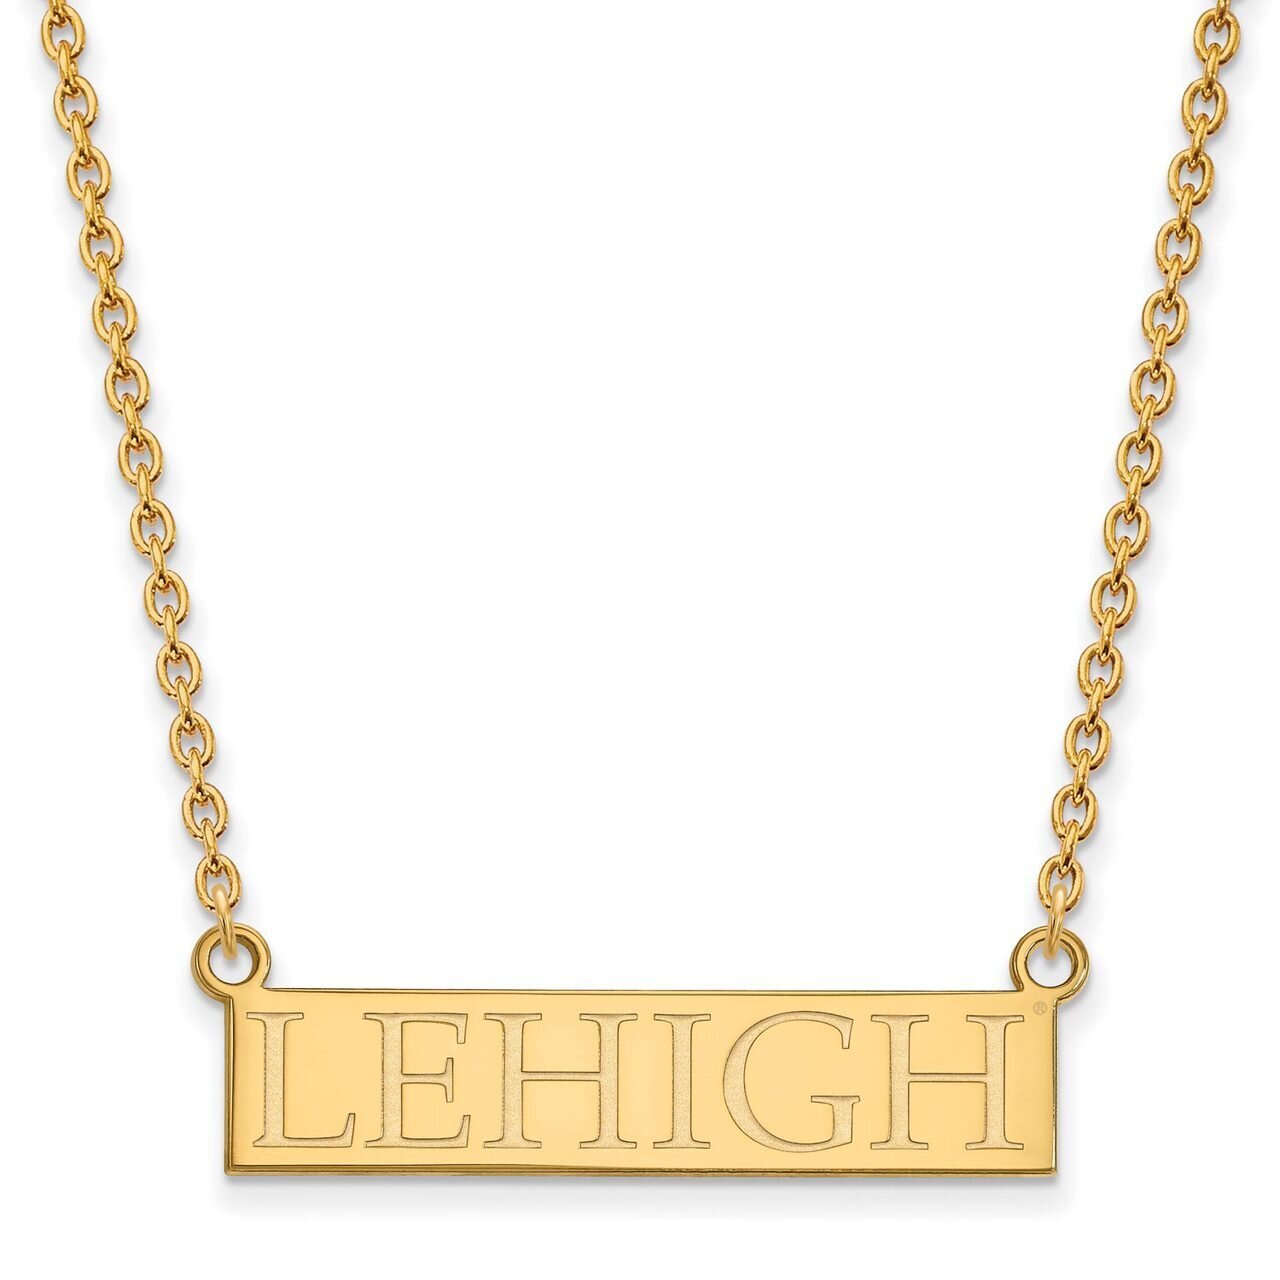 Lehigh University Large Pendant with Chain Necklace 14k Yellow Gold 4Y007LHU-18